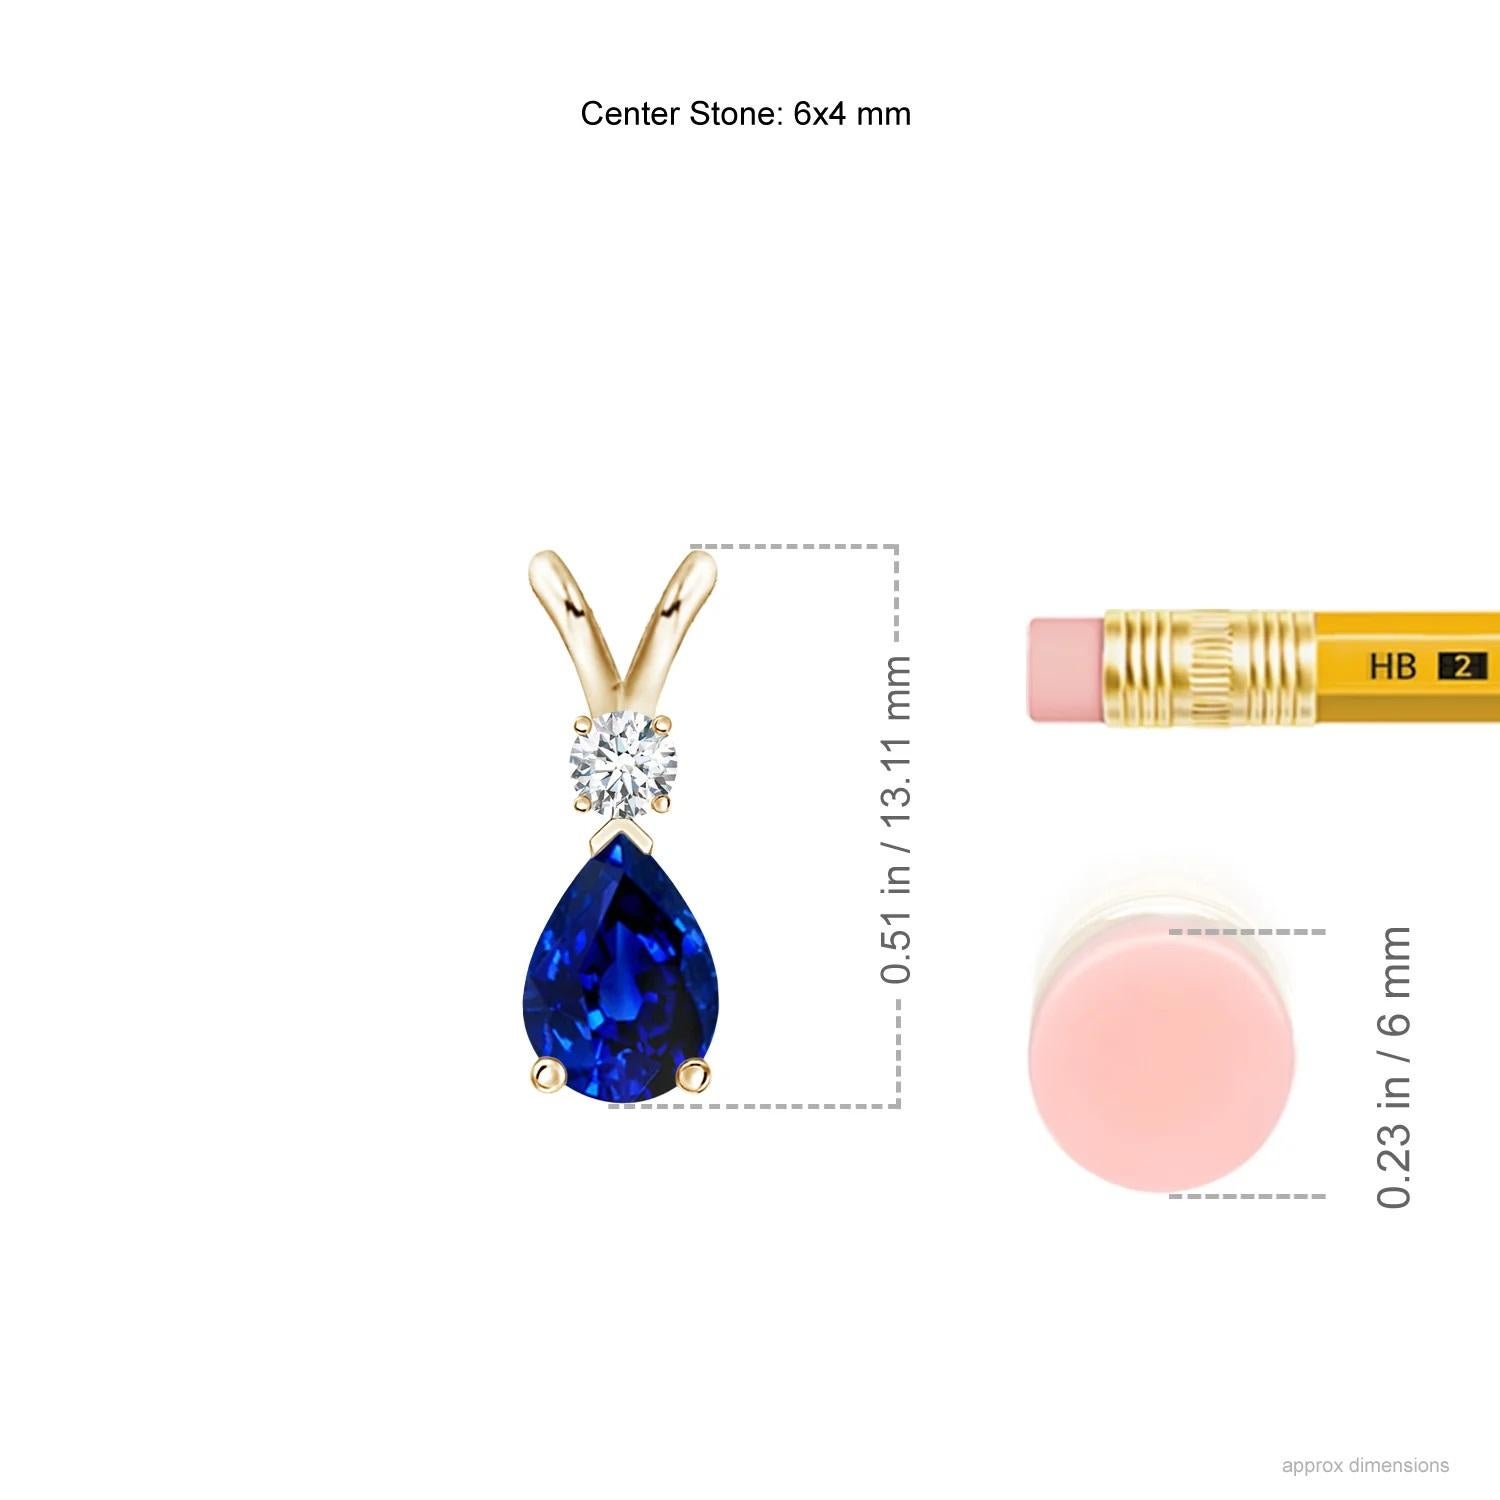 This classic solitaire pendant features a pear-shaped sapphire secured in a prong setting. A brilliant round diamond sits atop the blue gemstone adding to the design's charm. Simple yet appealing, this sapphire pendant in 14k yellow gold is crafted